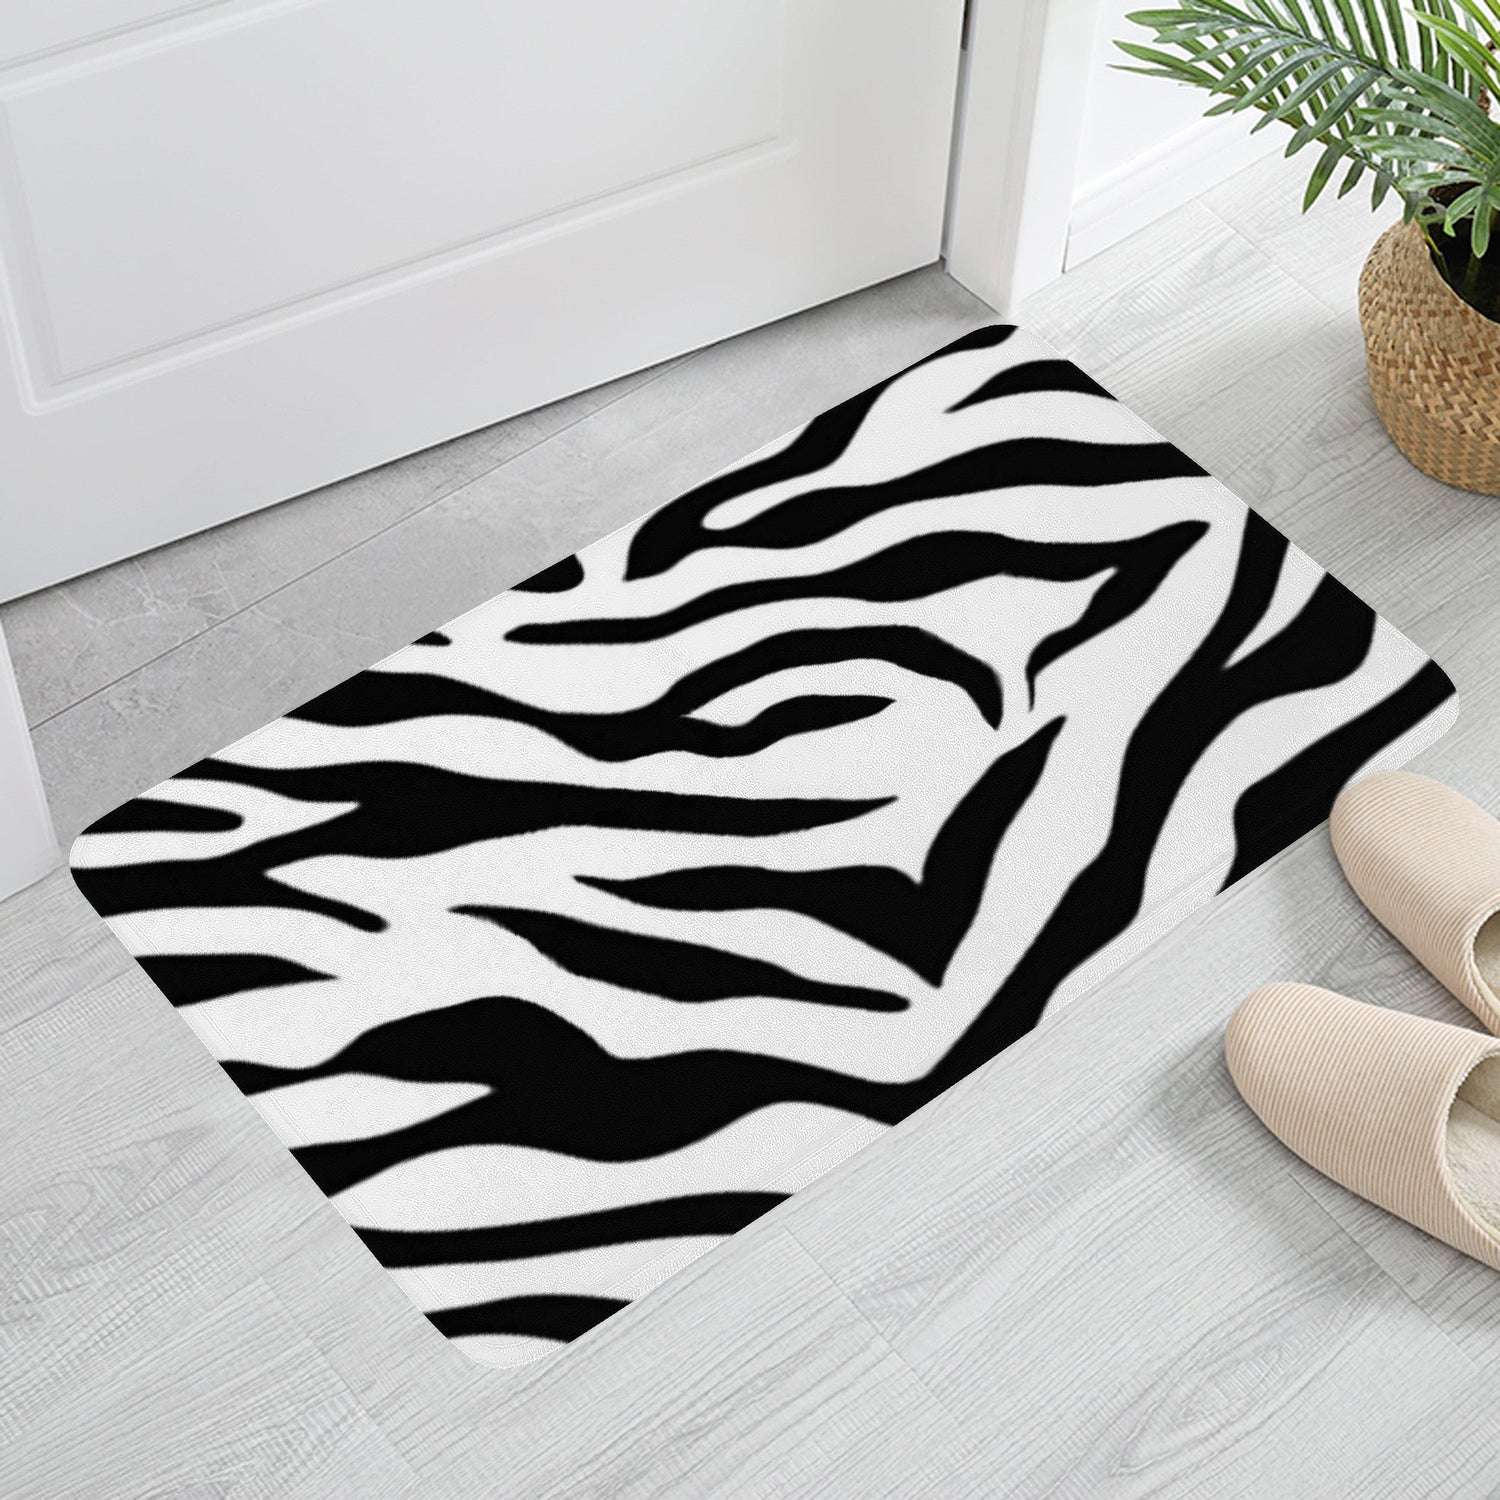 Black and White Zebra Doormat Home-clothes-jewelry